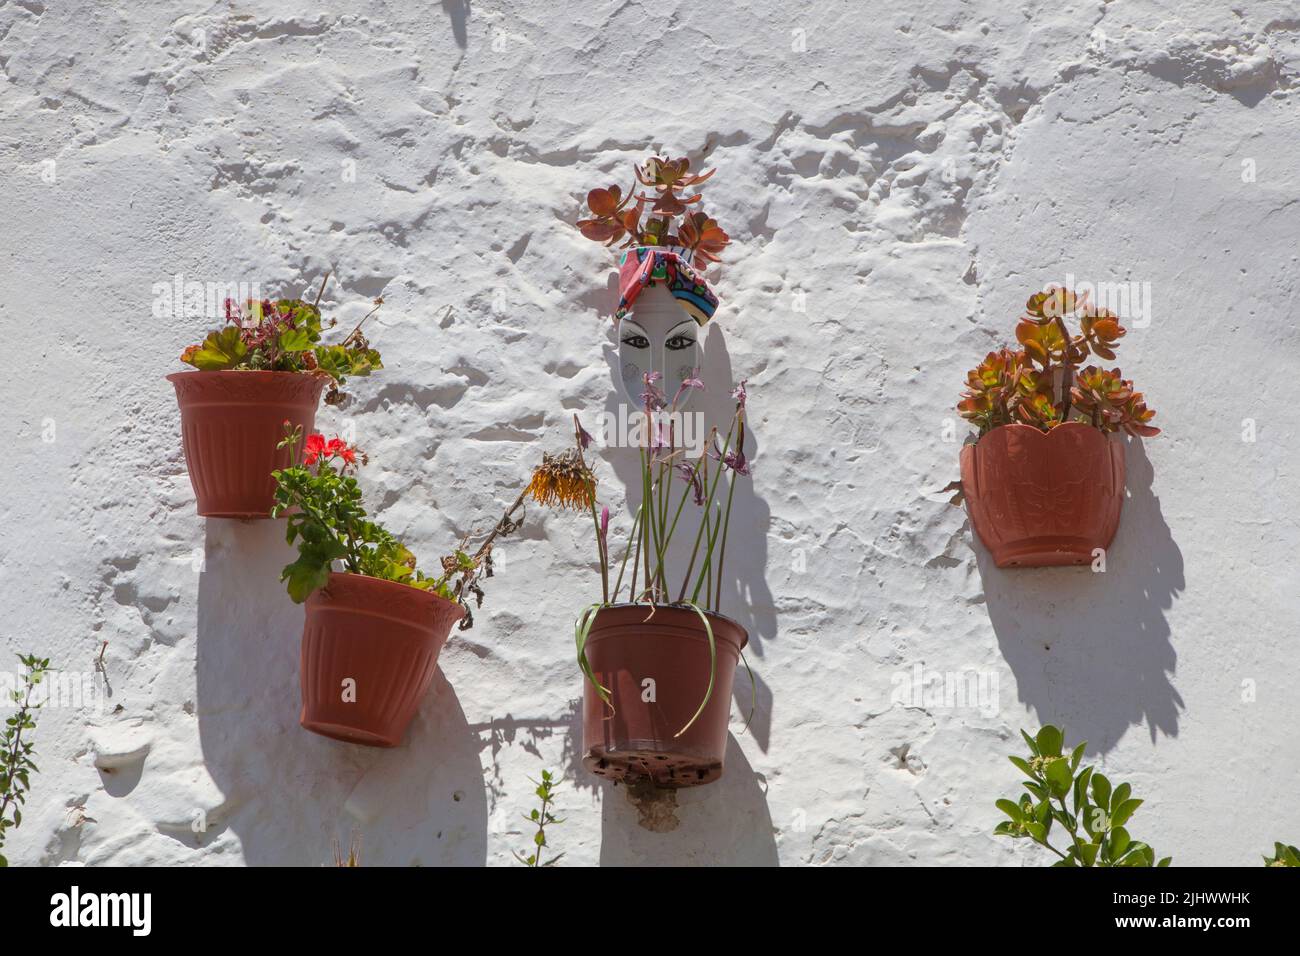 Detergent containers reused as flowerpot and attached on outdoor wall. Magacela Historical ensemble, Badajoz, Extremadura, Spain Stock Photo